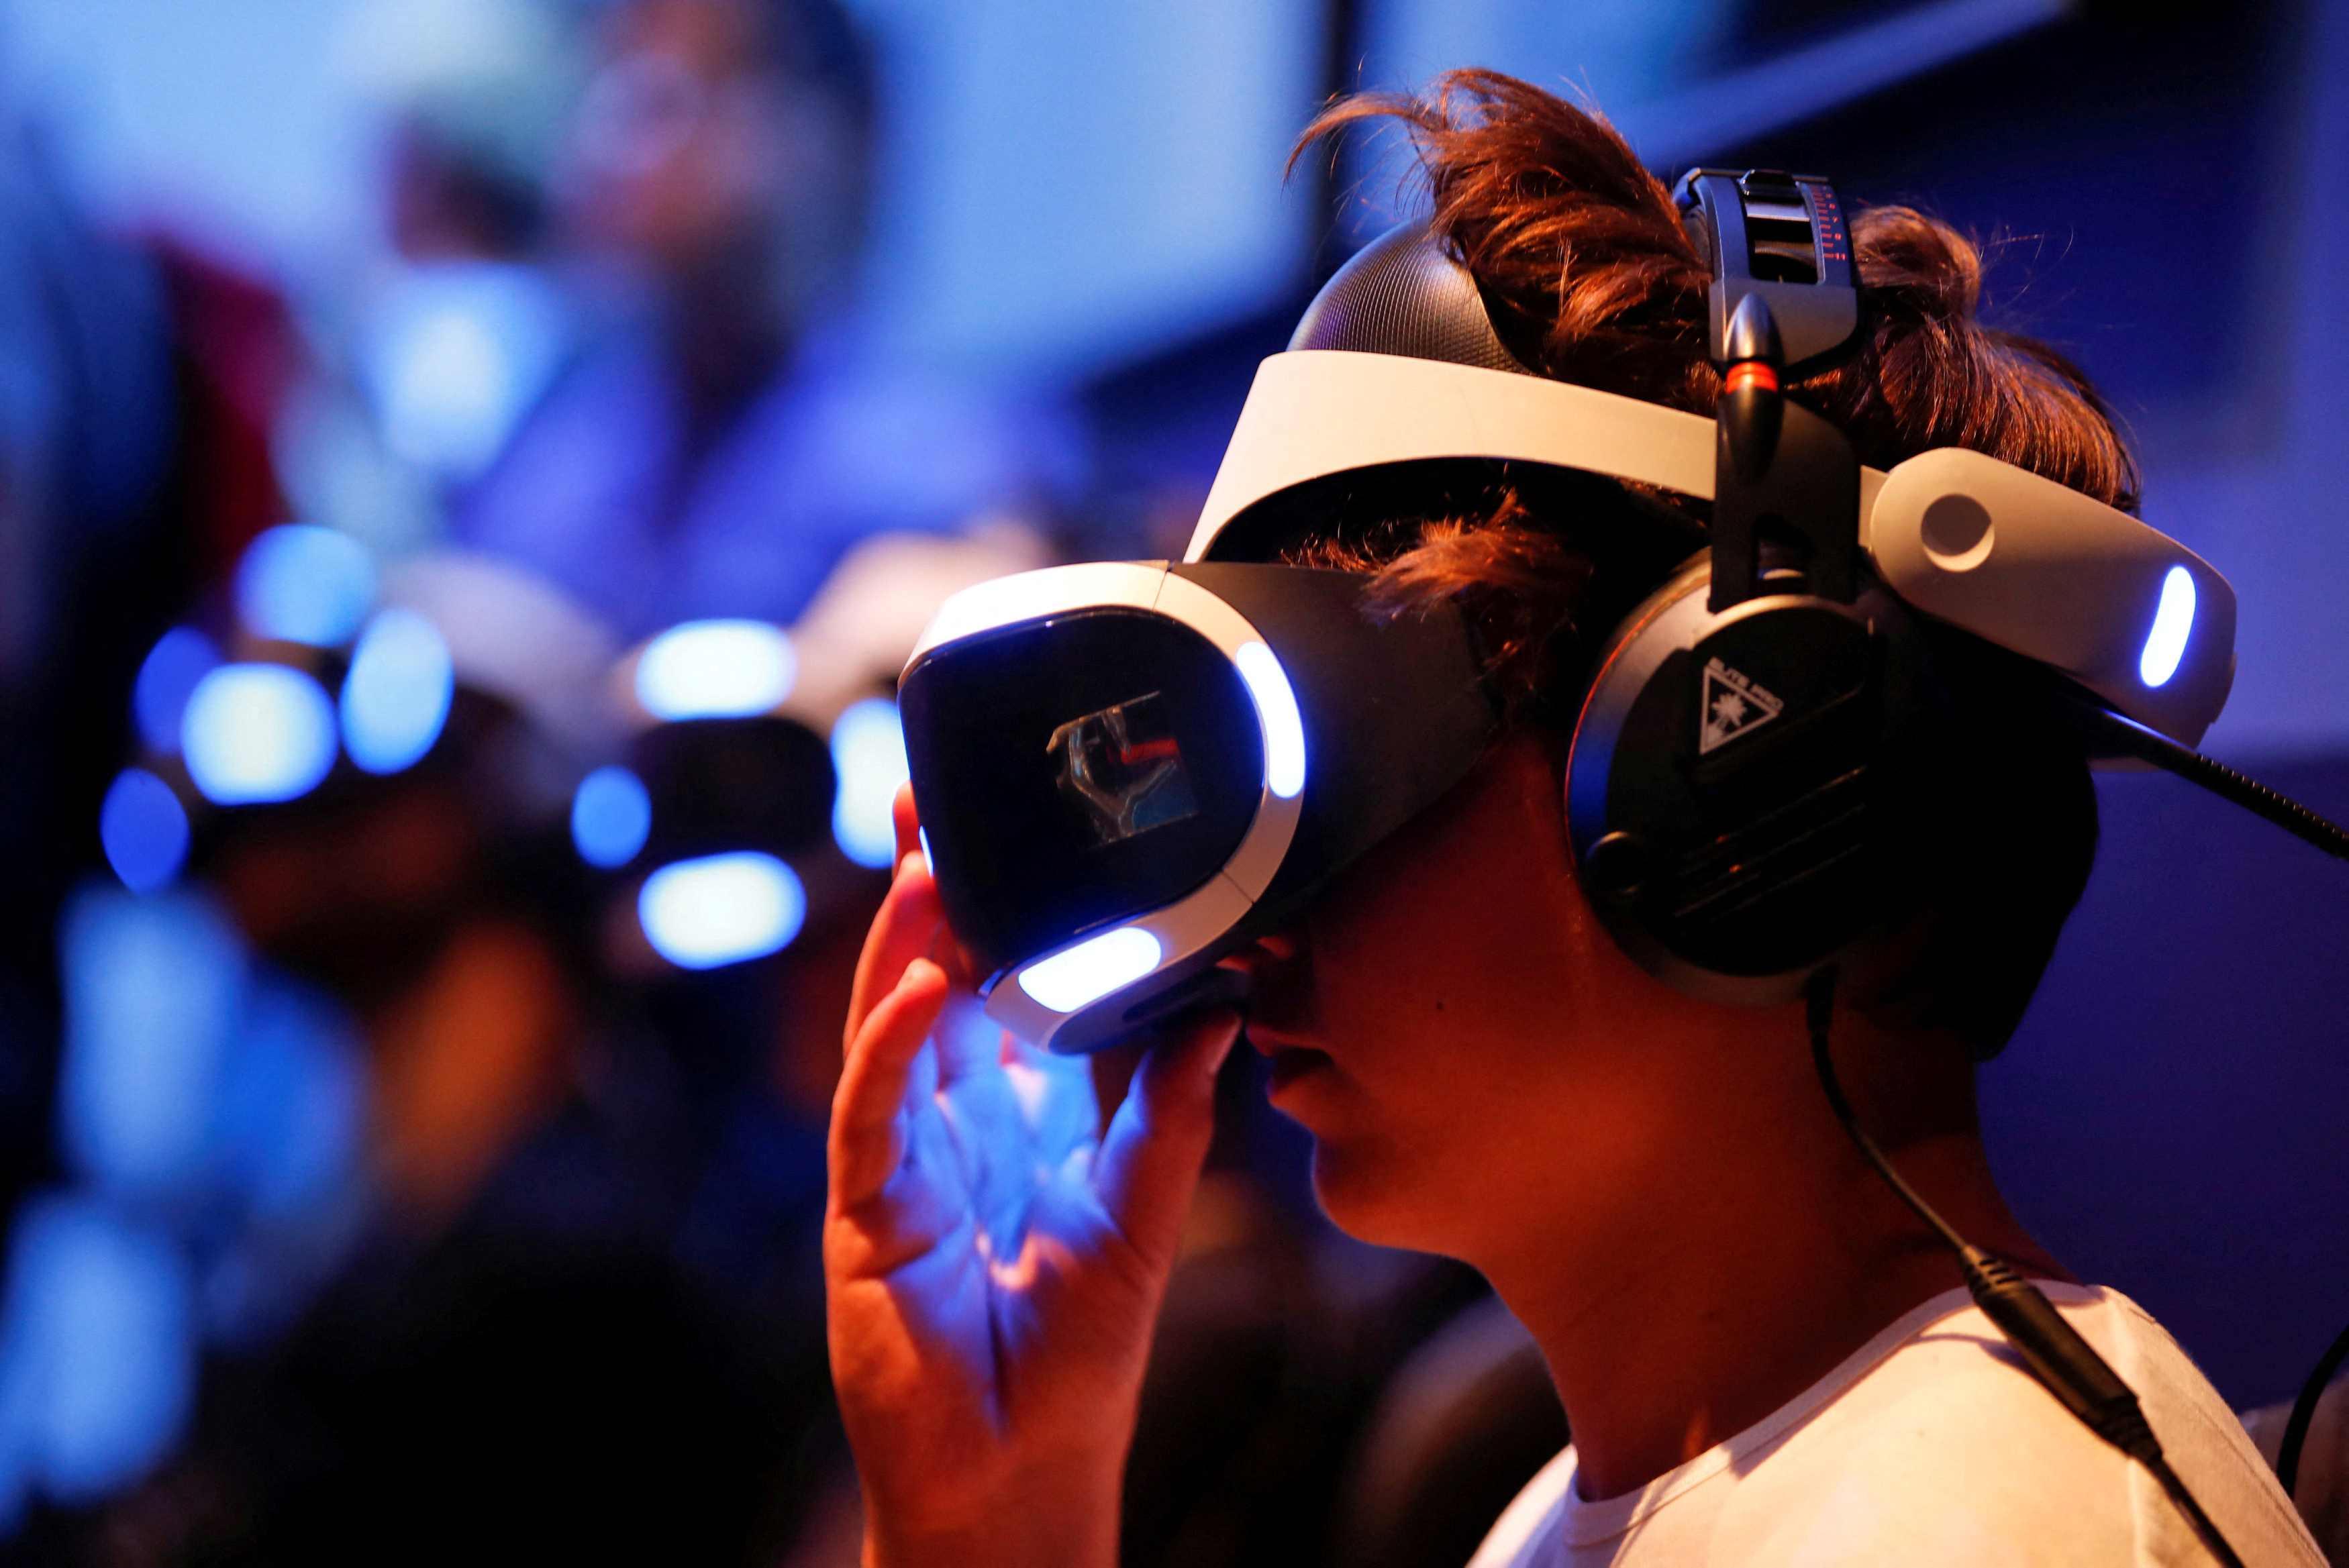 Games wears VR goggles at Gamescom in Cologne